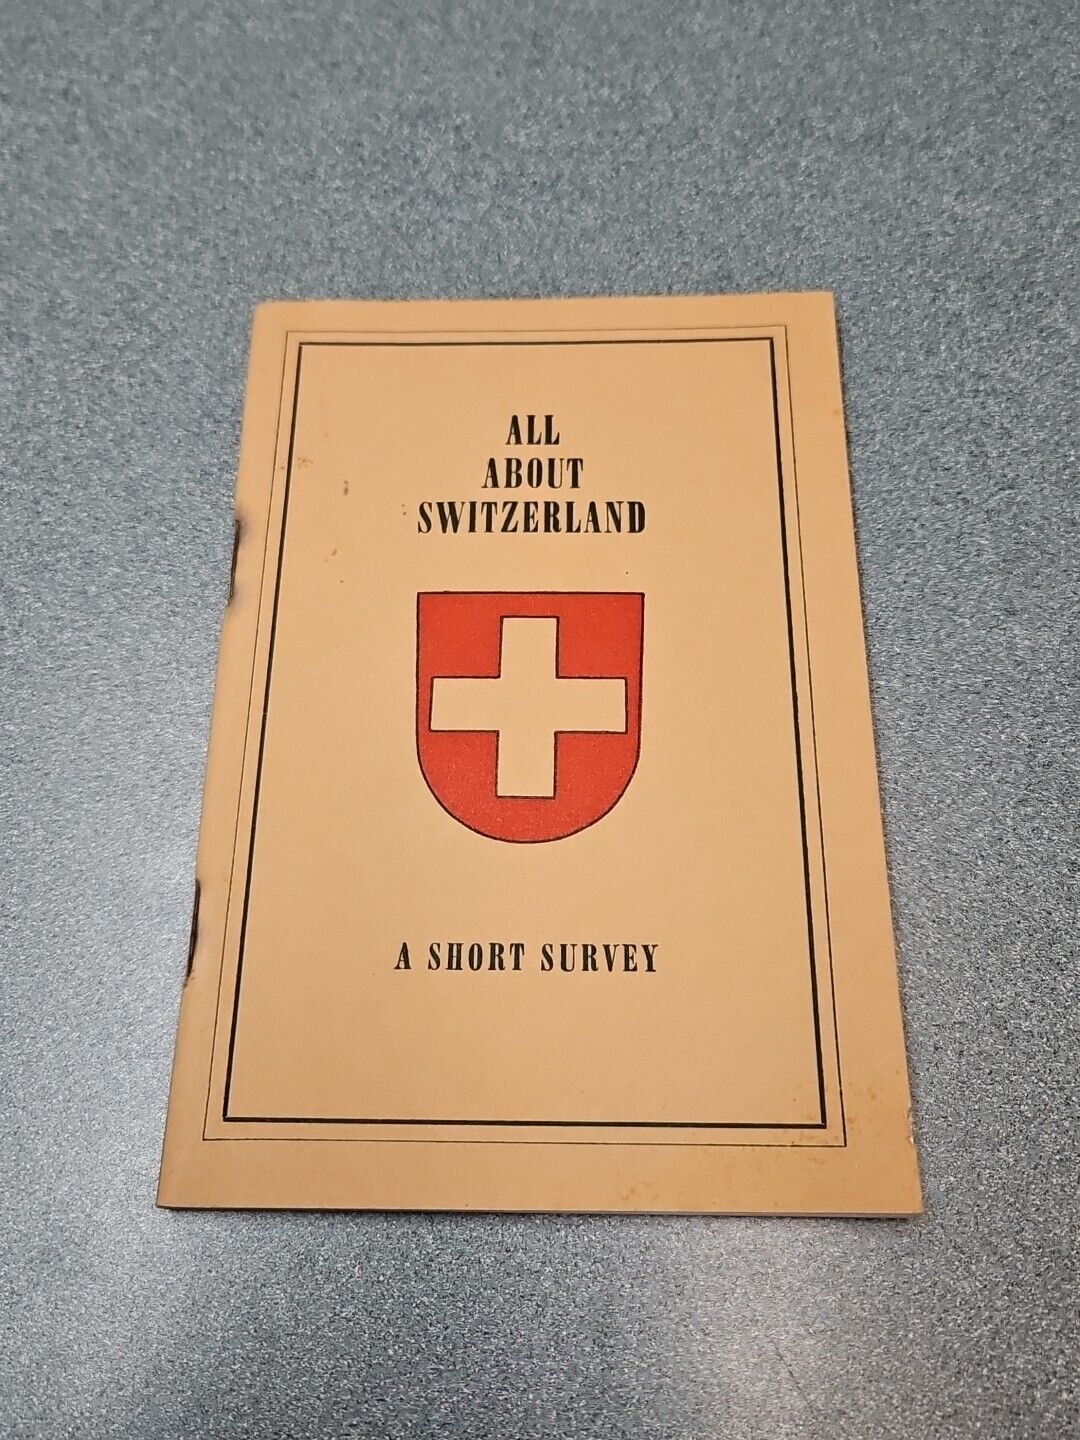 All About Switzerland Winter Olympics 1948 